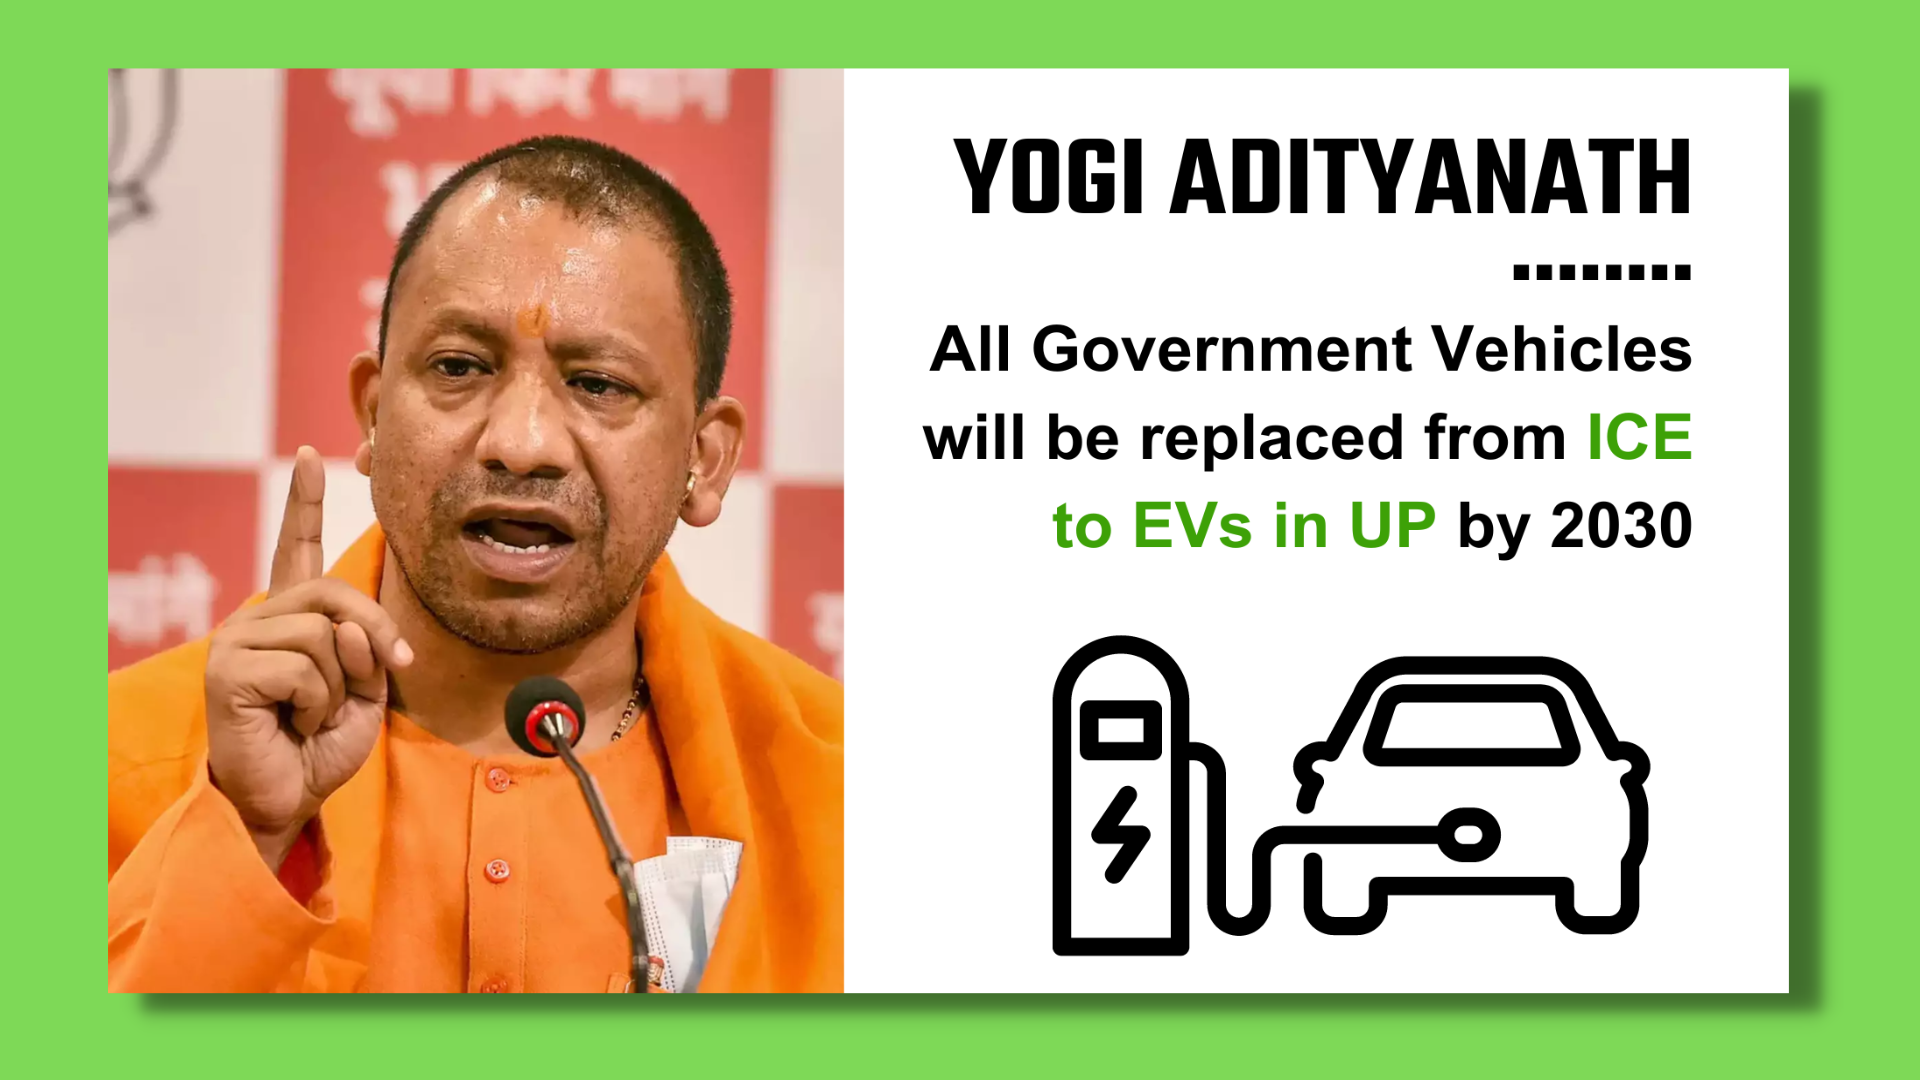 All government vehicles will be replaced from ICE to EVs in UP by 2030: Yogi Adityanath